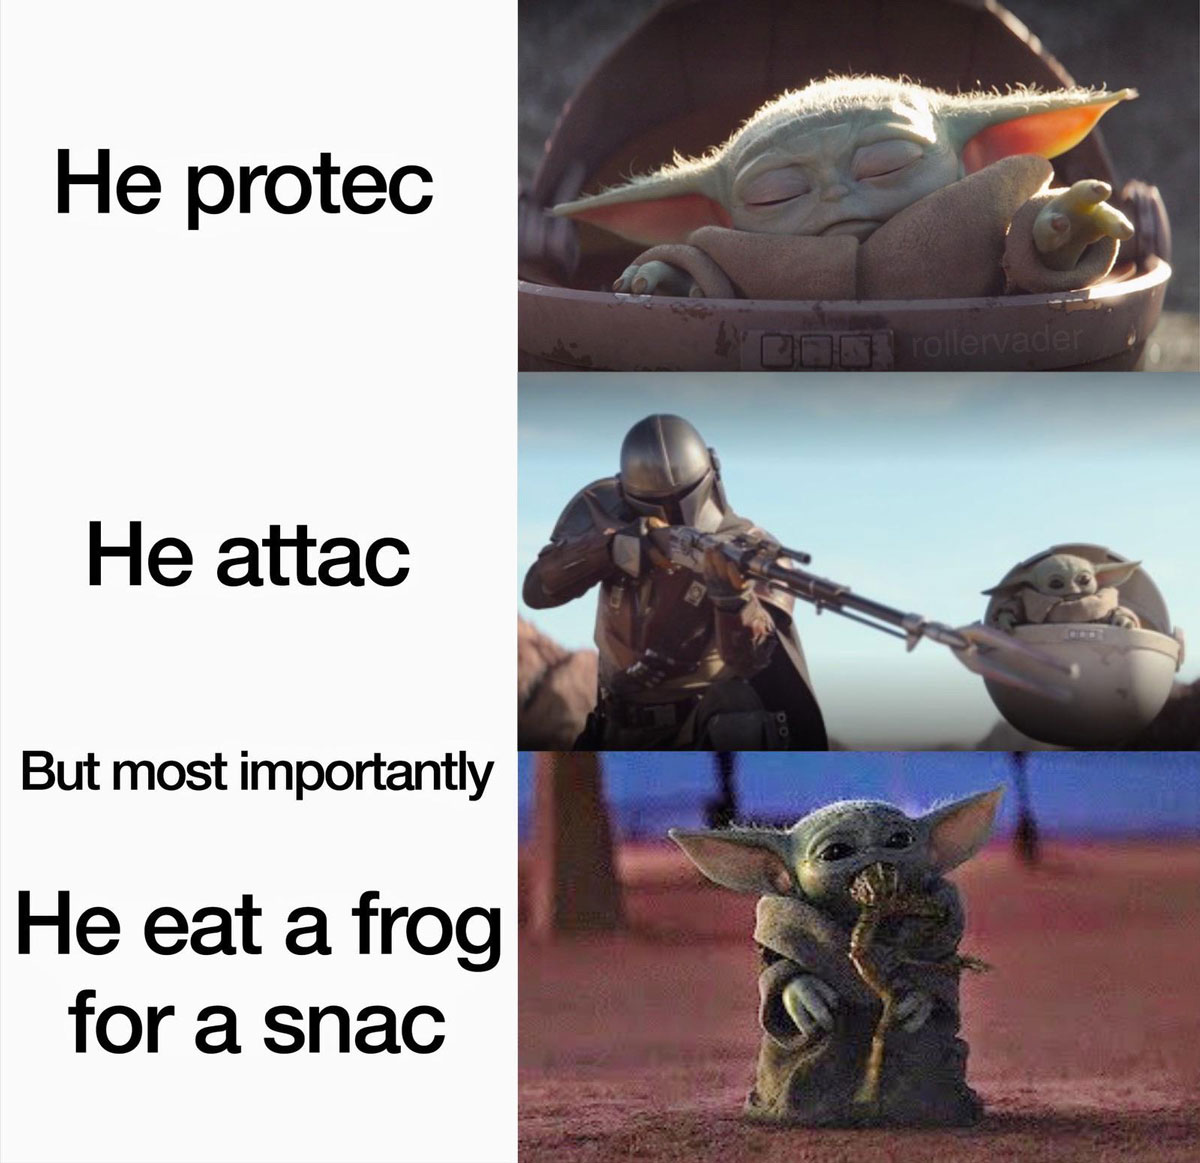 baby yoda meme - Yoda - He protec rollervad He attac But most importantly He eat a frog for a snac